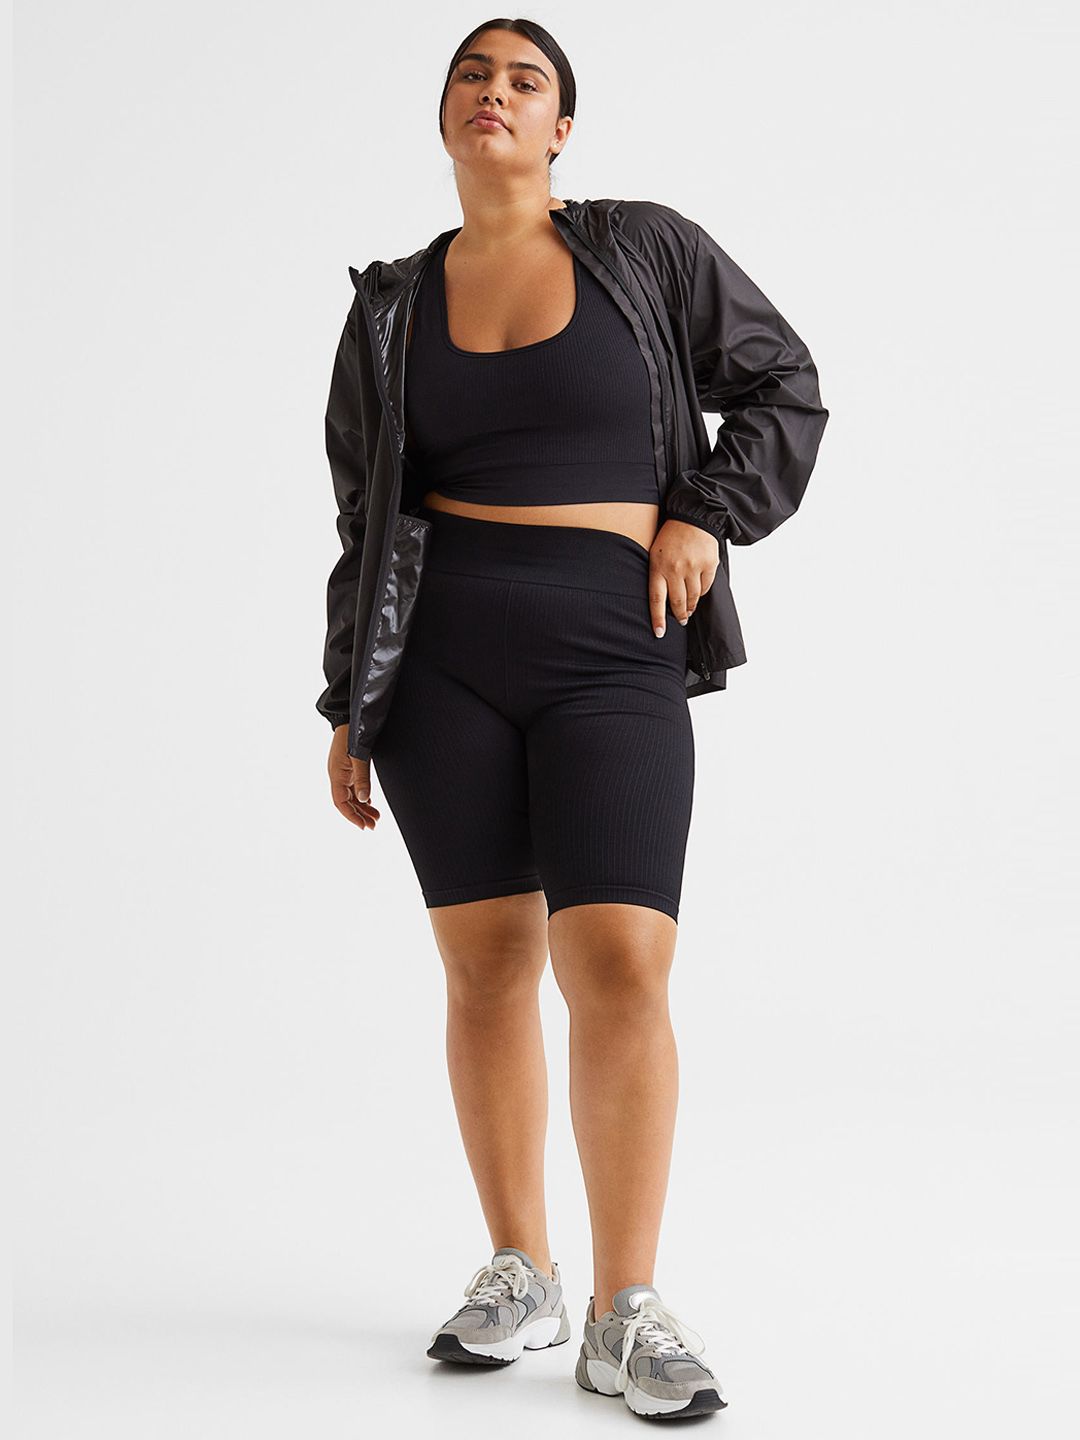 H&M Plus Women Black Seamless Sports Cycling Shorts Price in India